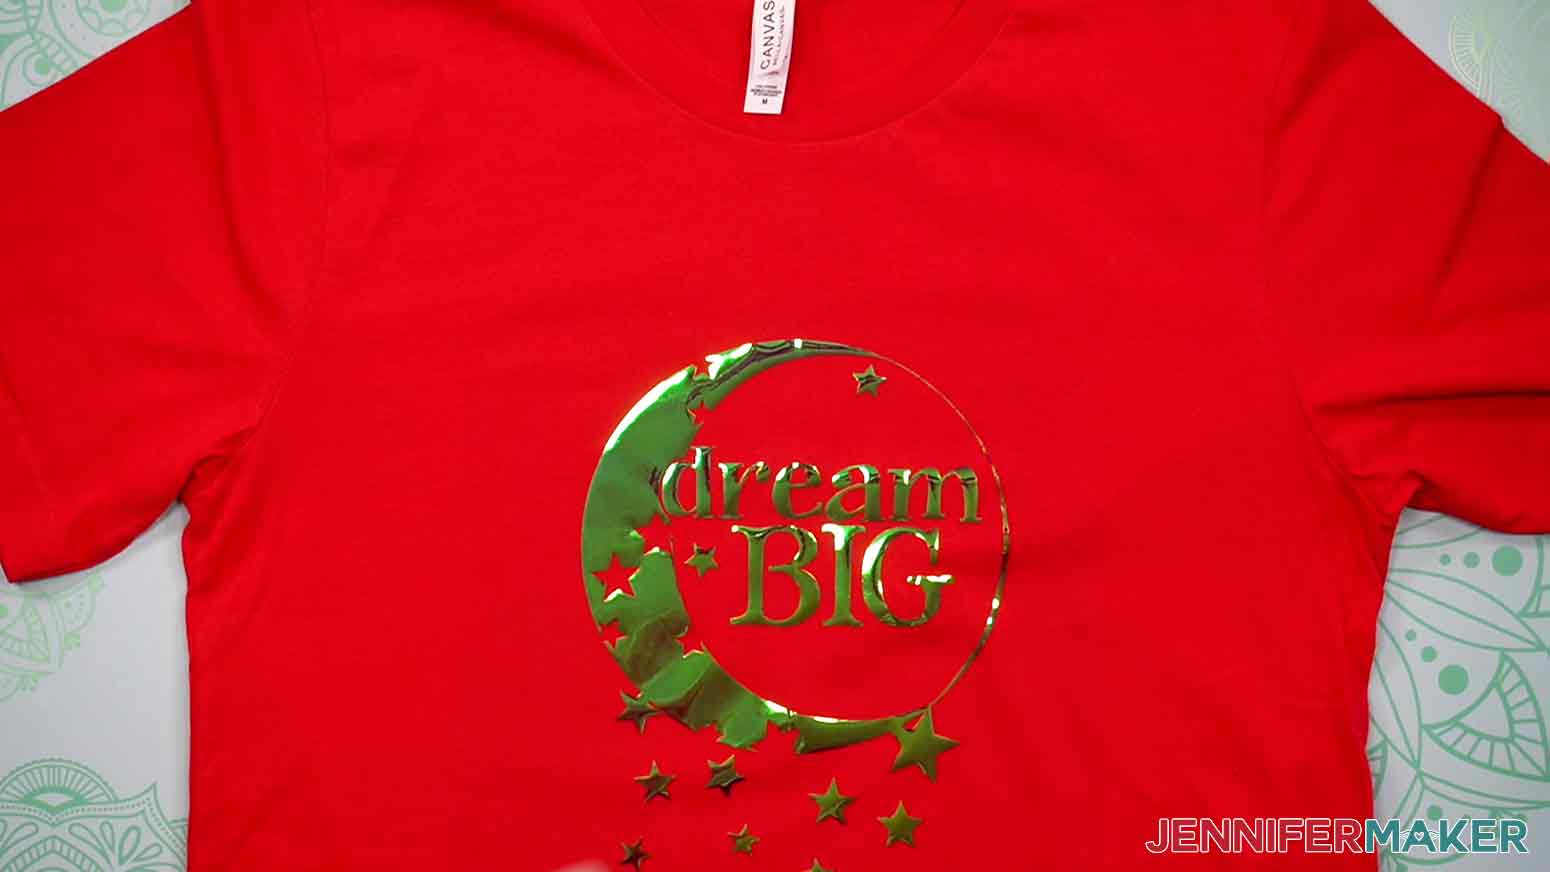 Here is the completed red, adult crew-neck T-shirt with the Dream Big graphic perfectly aligned after using the T-Shirt Ruler.